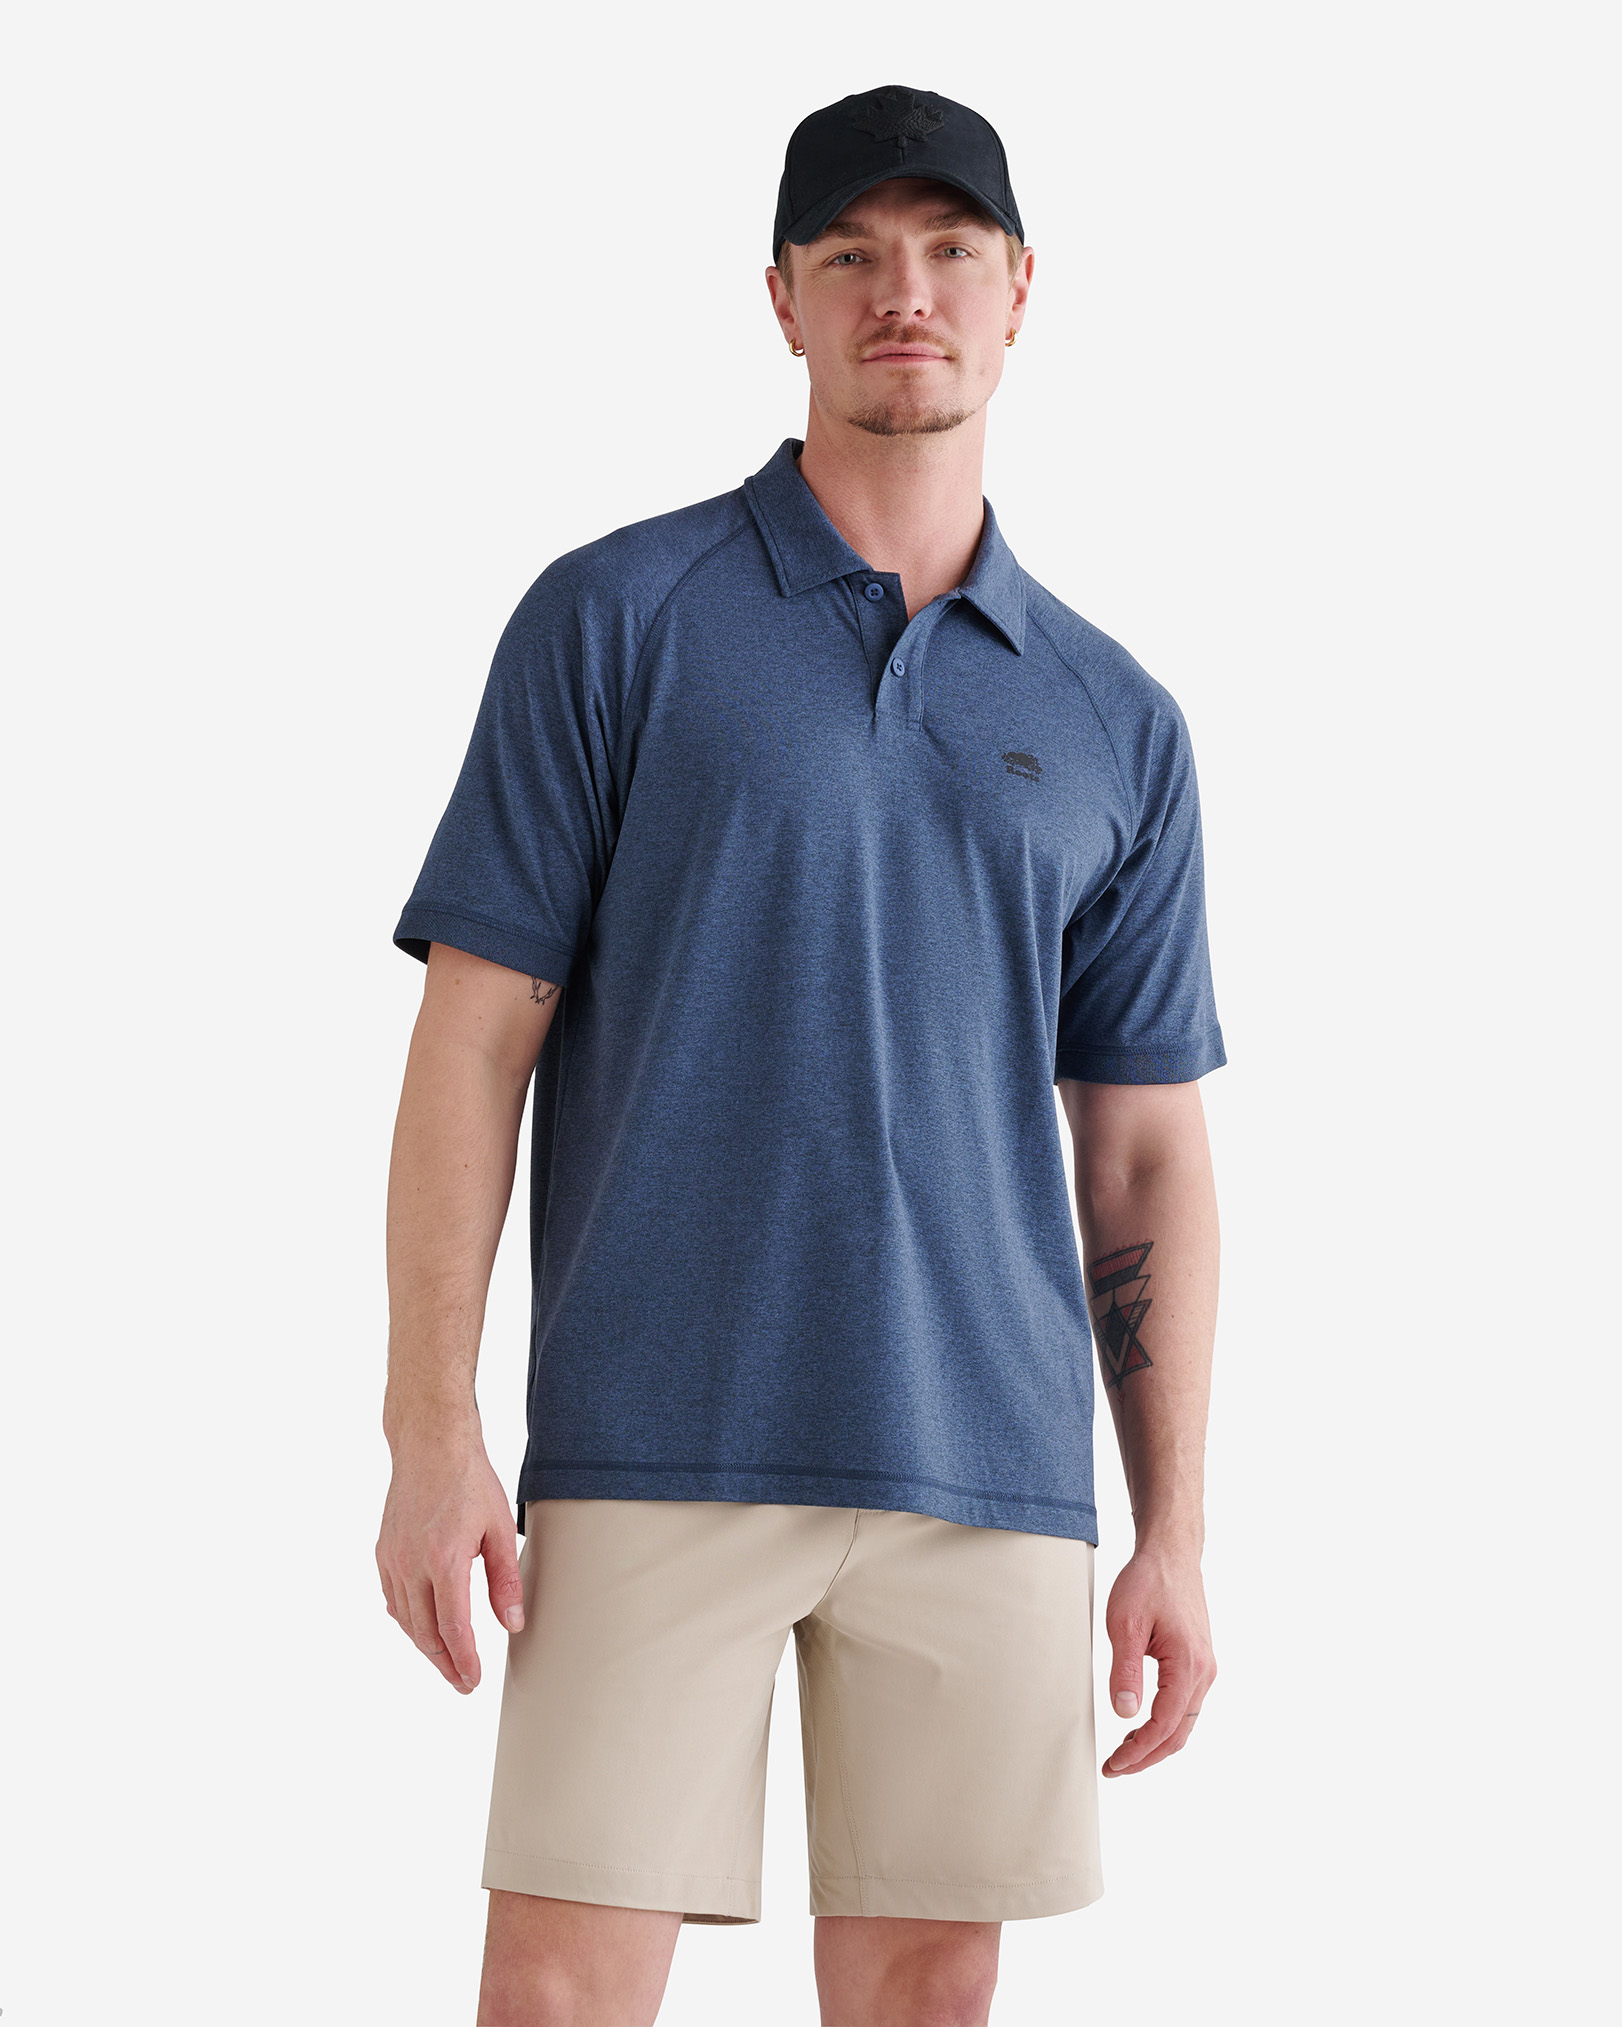 Roots Renew Peppered Polo T-Shirt in Vintage Indigo Ppr